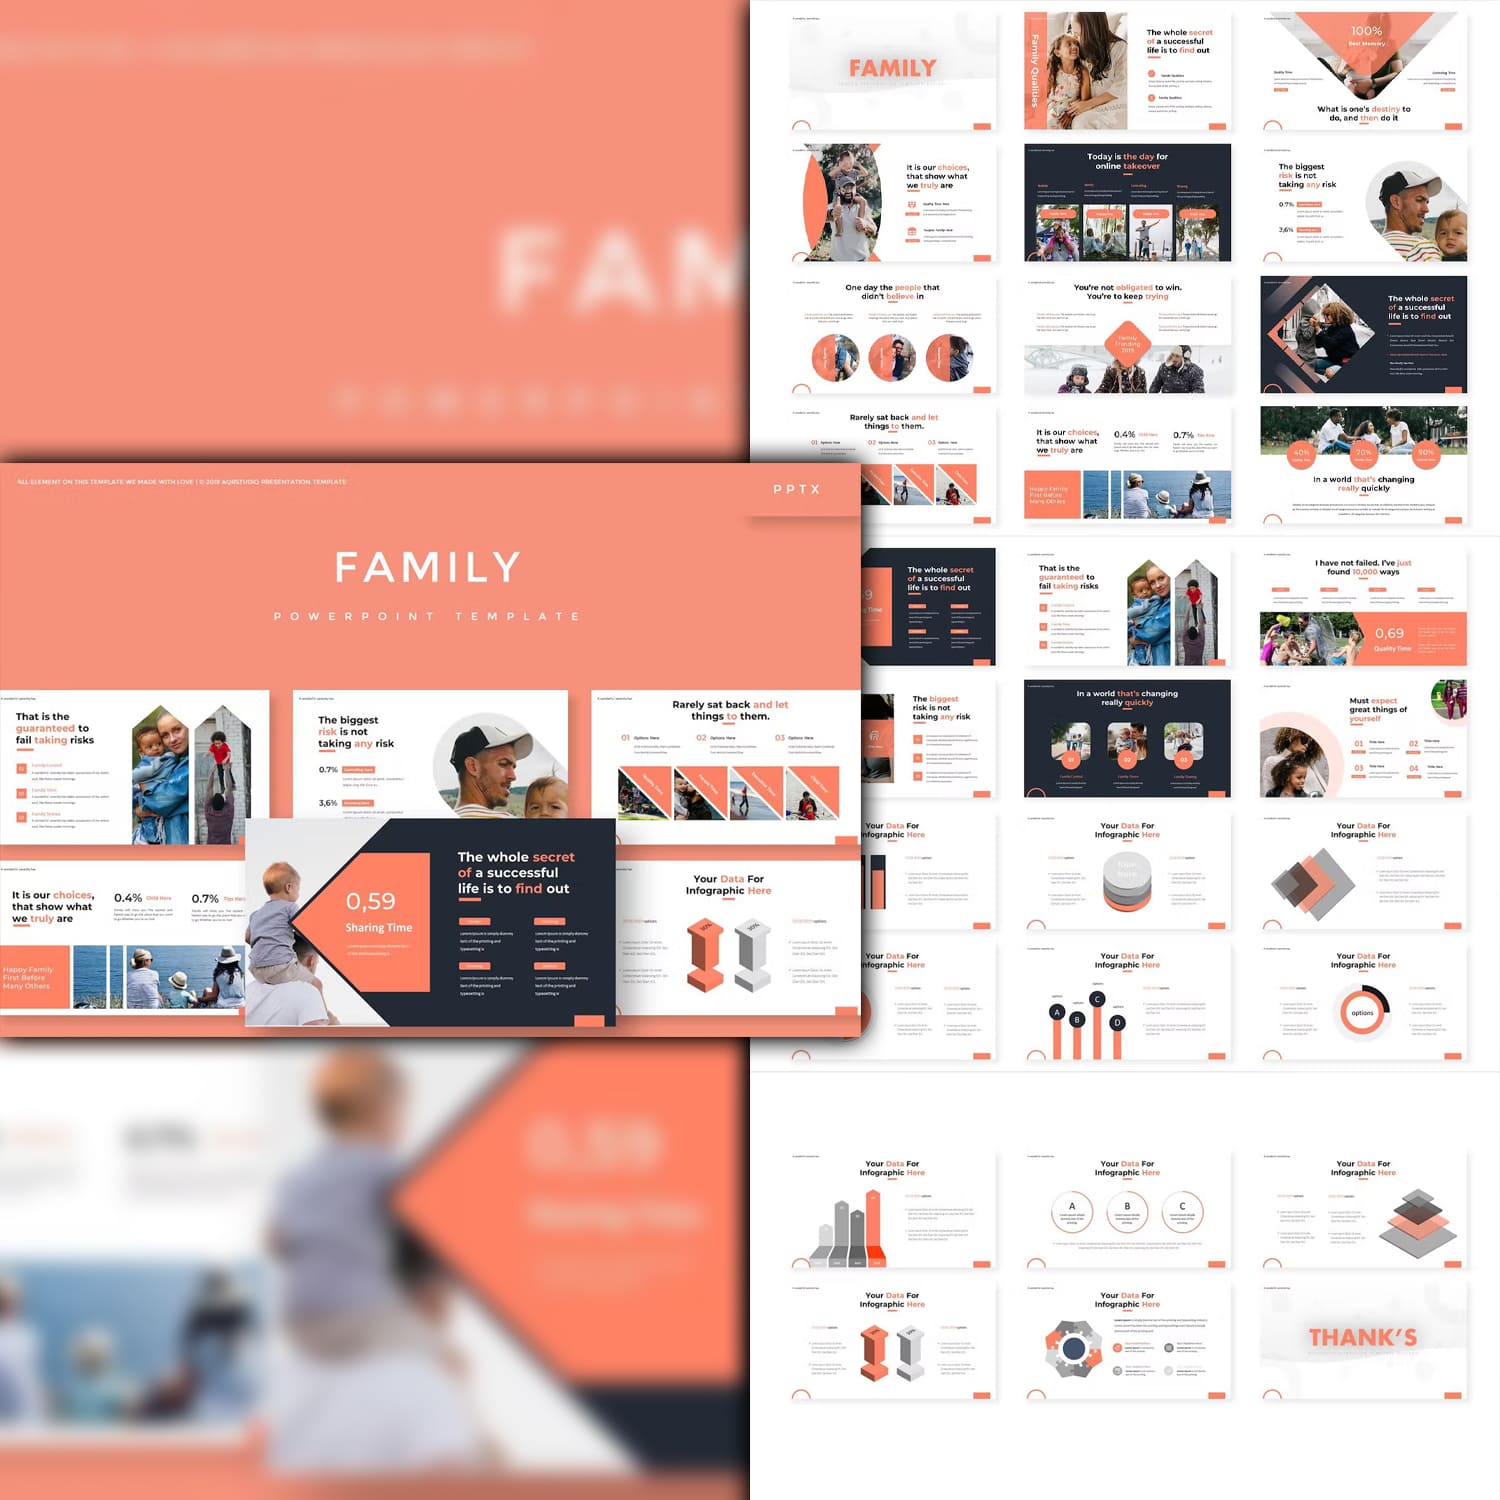 Family powerpoint template from aqrstudio.